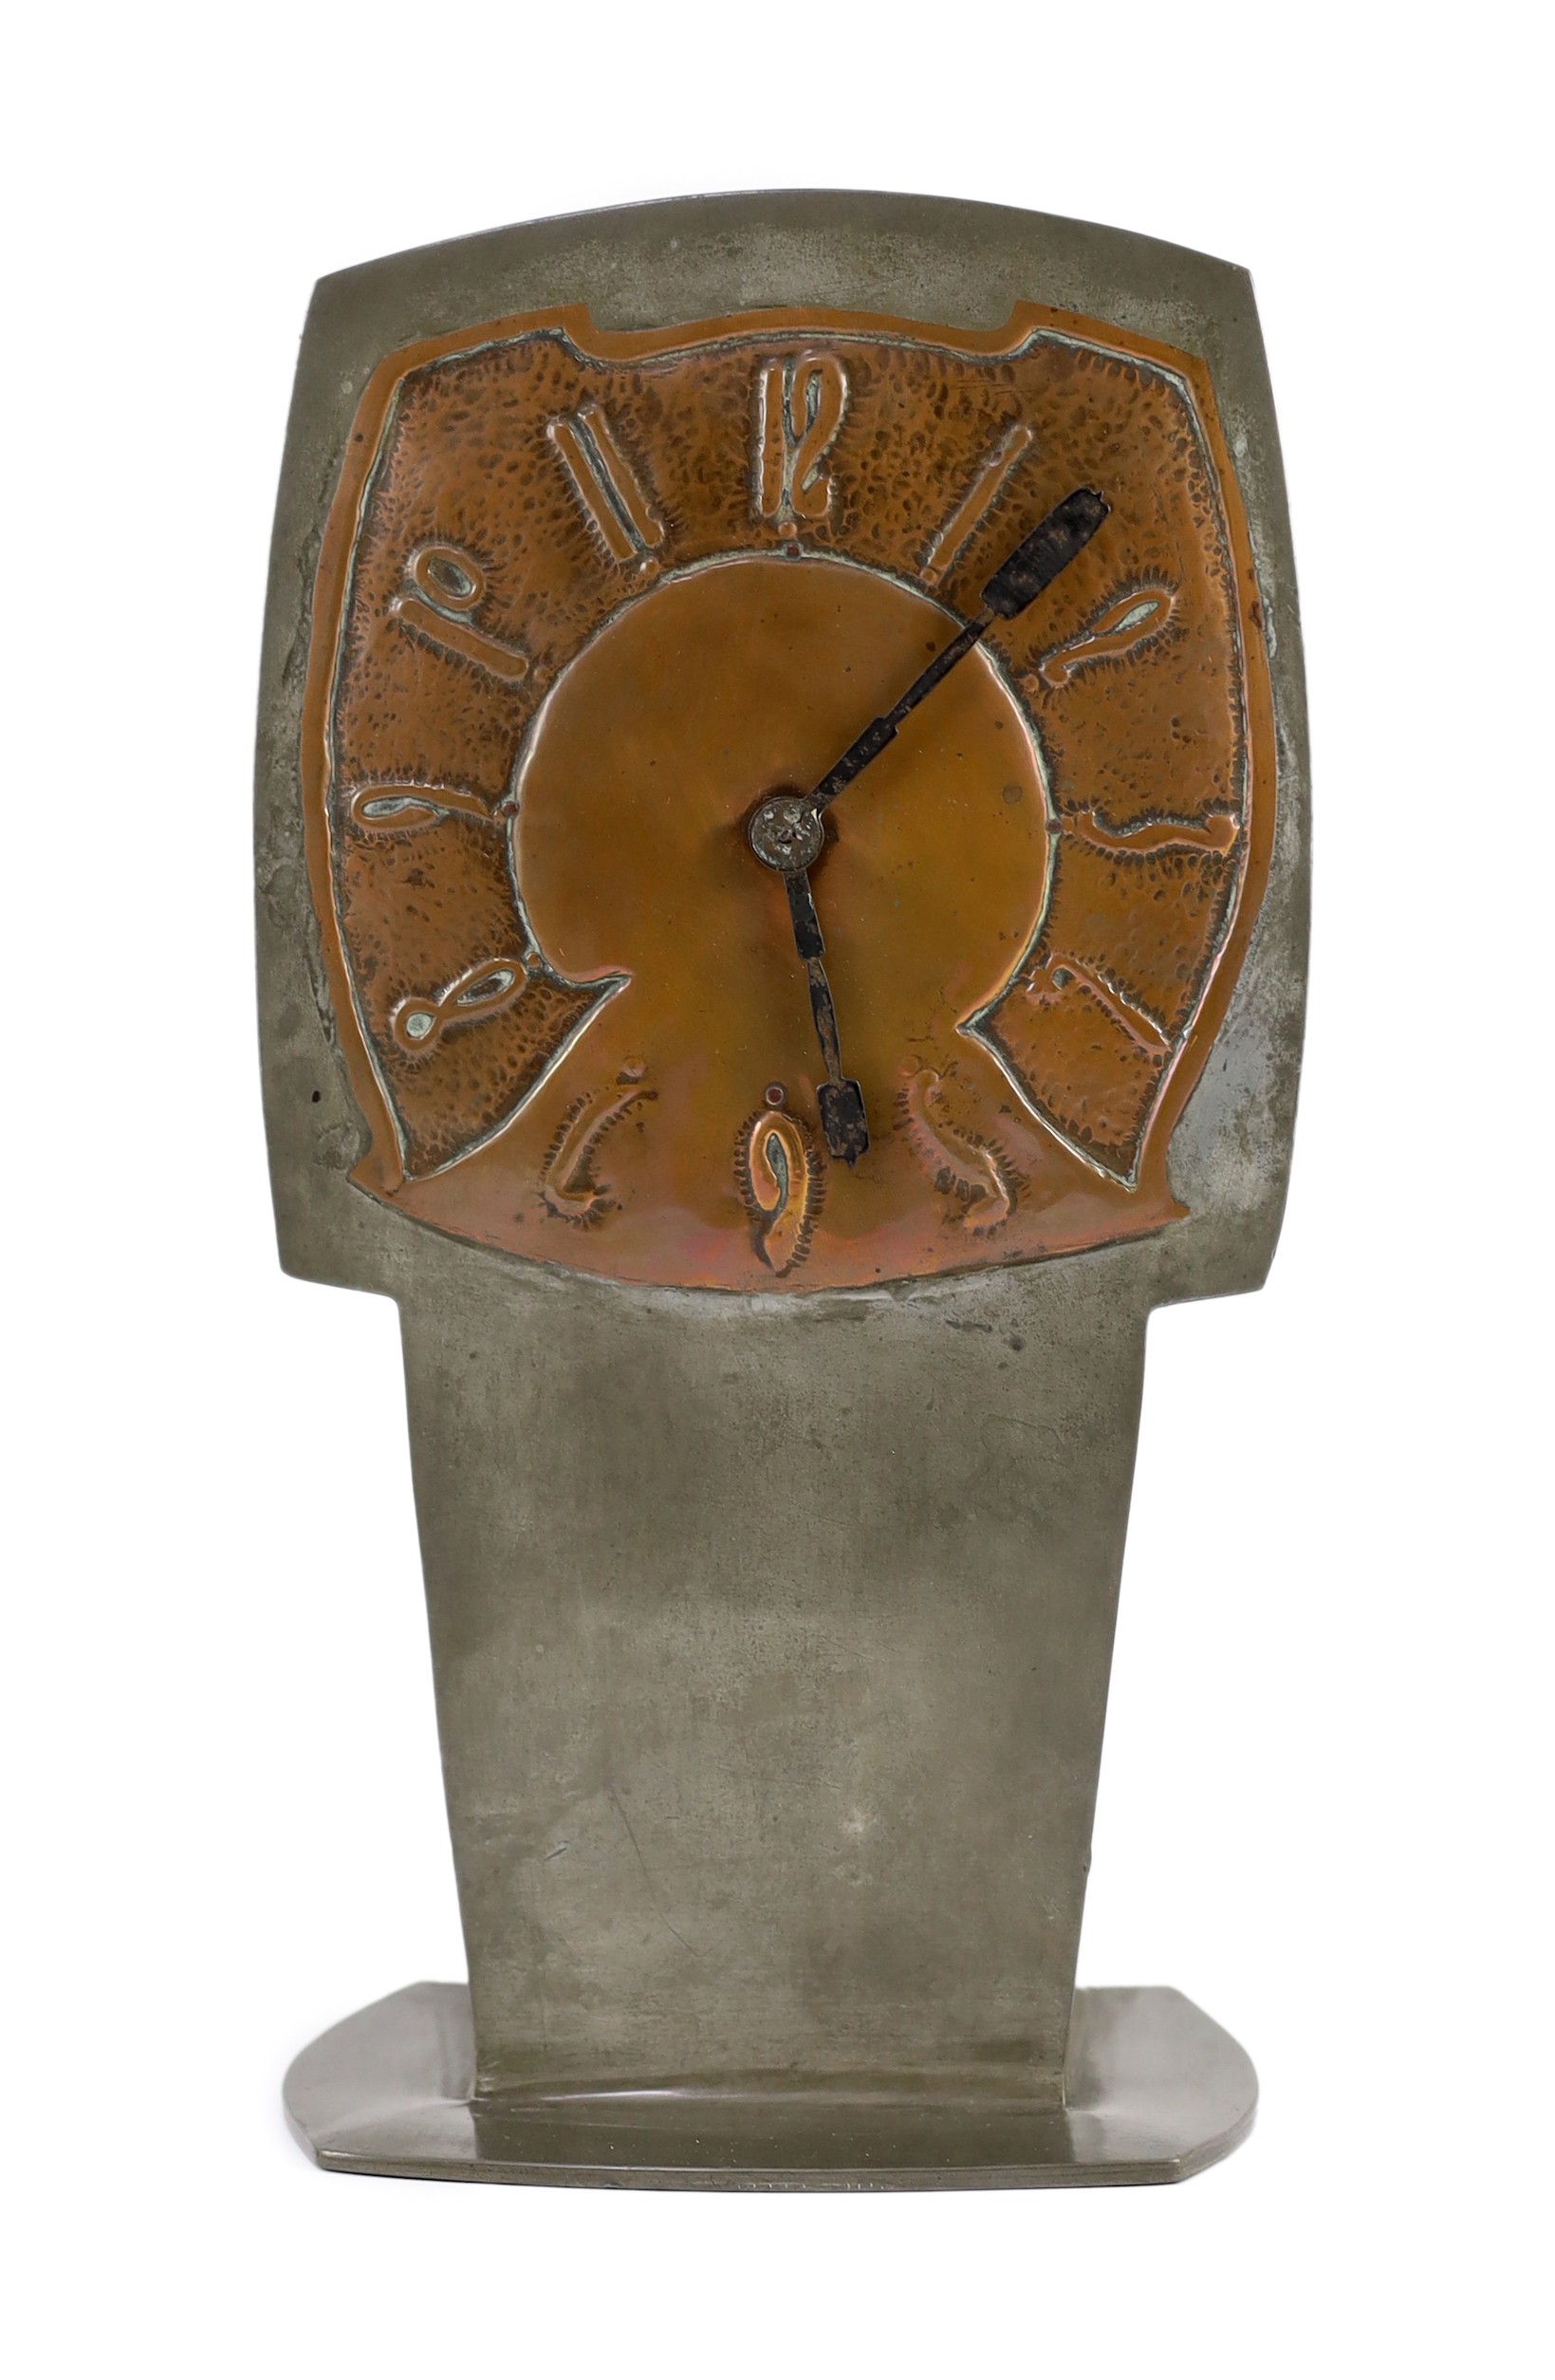 Archibald Knox for Liberty & Co., a rare ‘Tudric’ pewter and patinated copper clock, c.1902-05, model no. 0253